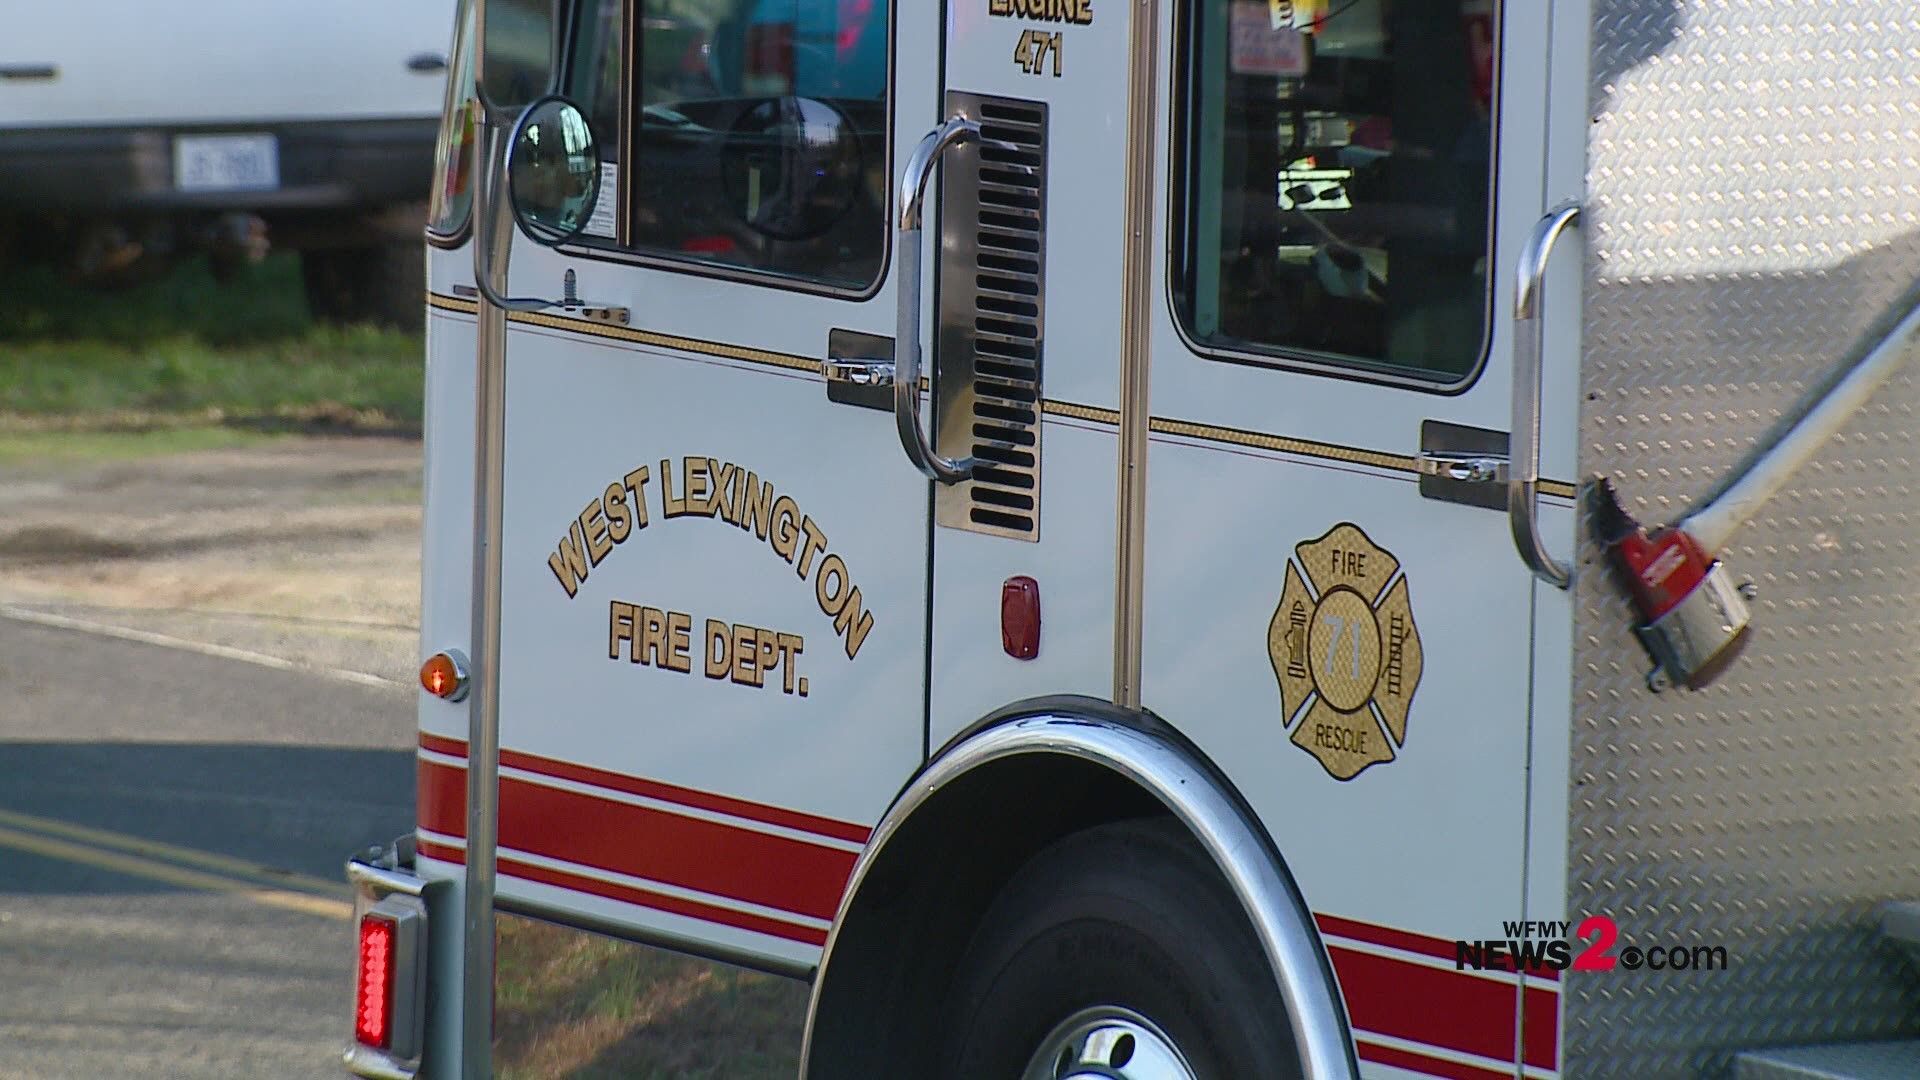 Davidson County Sheriff's Office says two people died in a house fire on Horseshoe Neck Road.